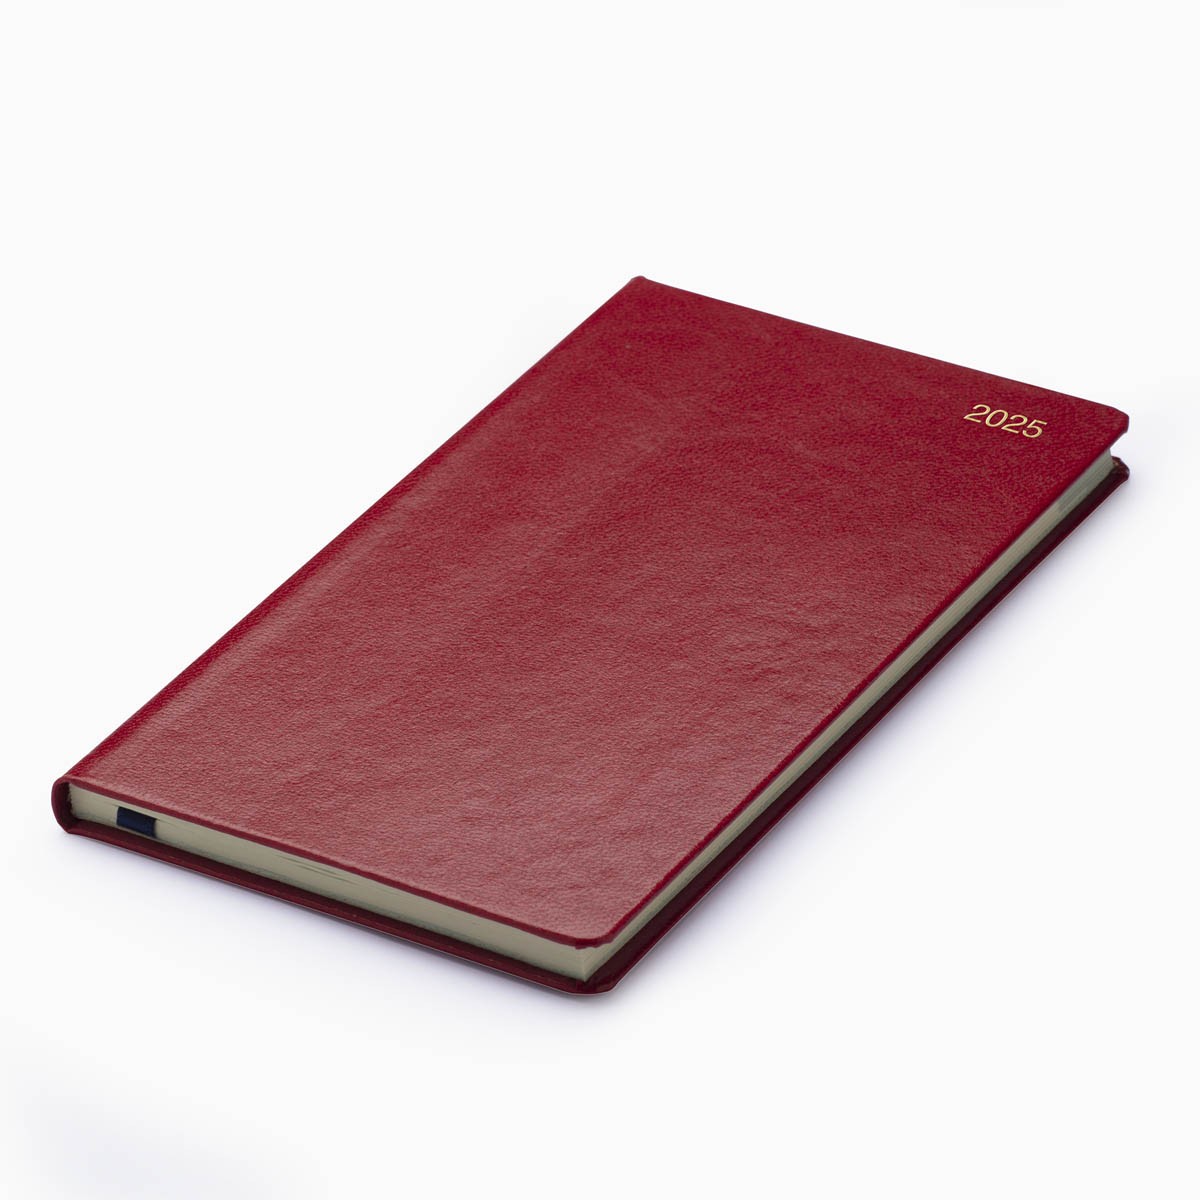 Strata Pocket Diary - Cream Pages